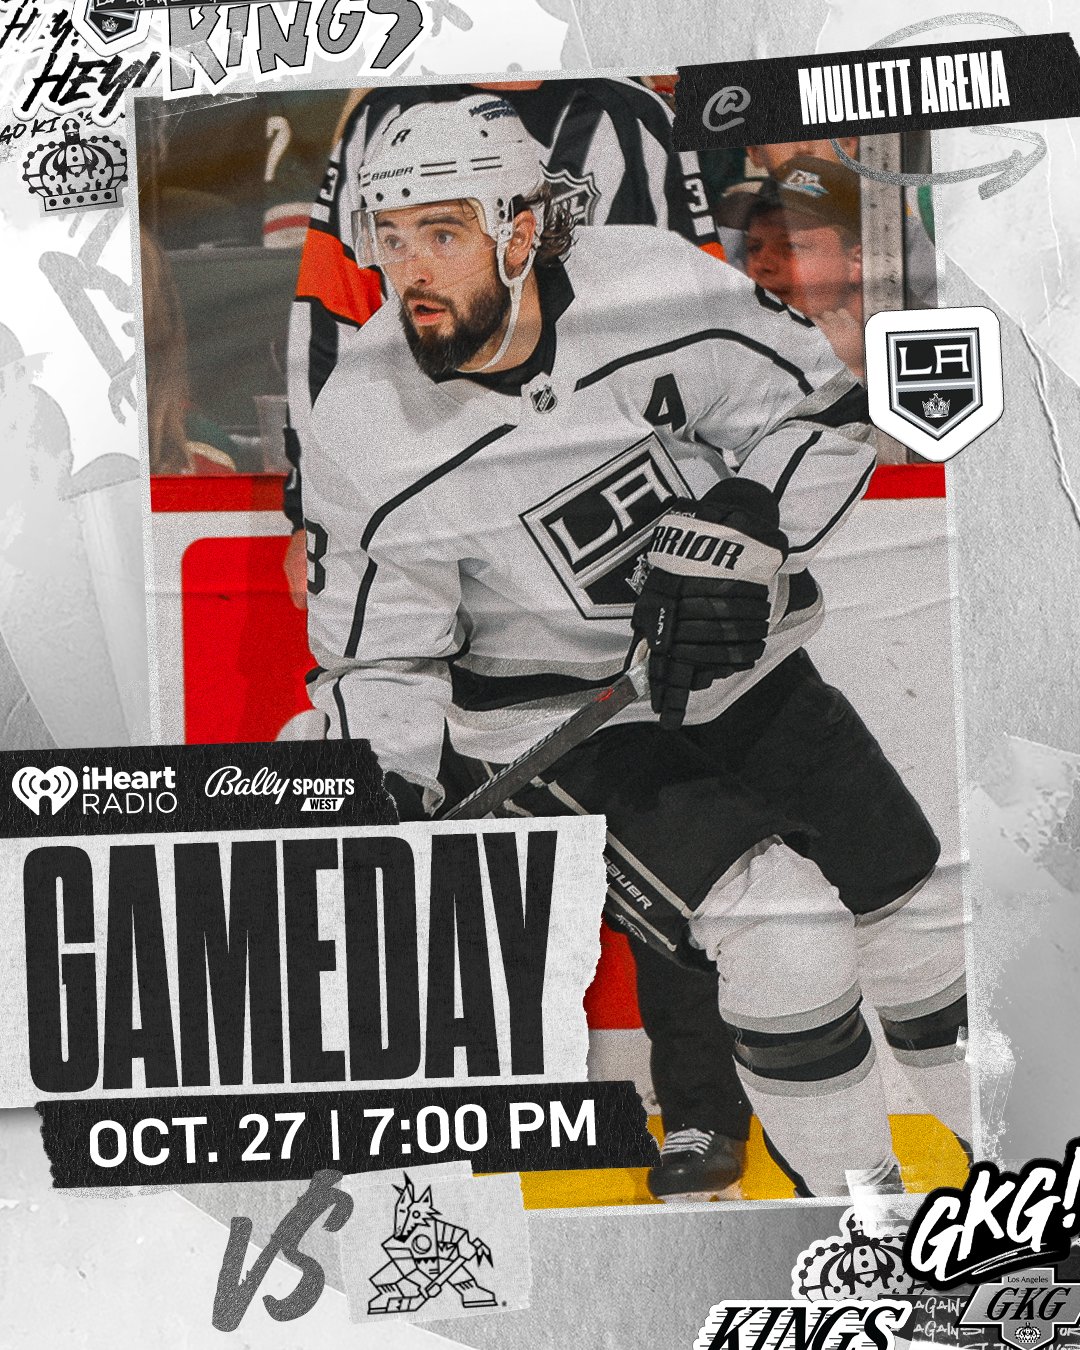 LA Kings - One of the best nights of the year is coming up! Get